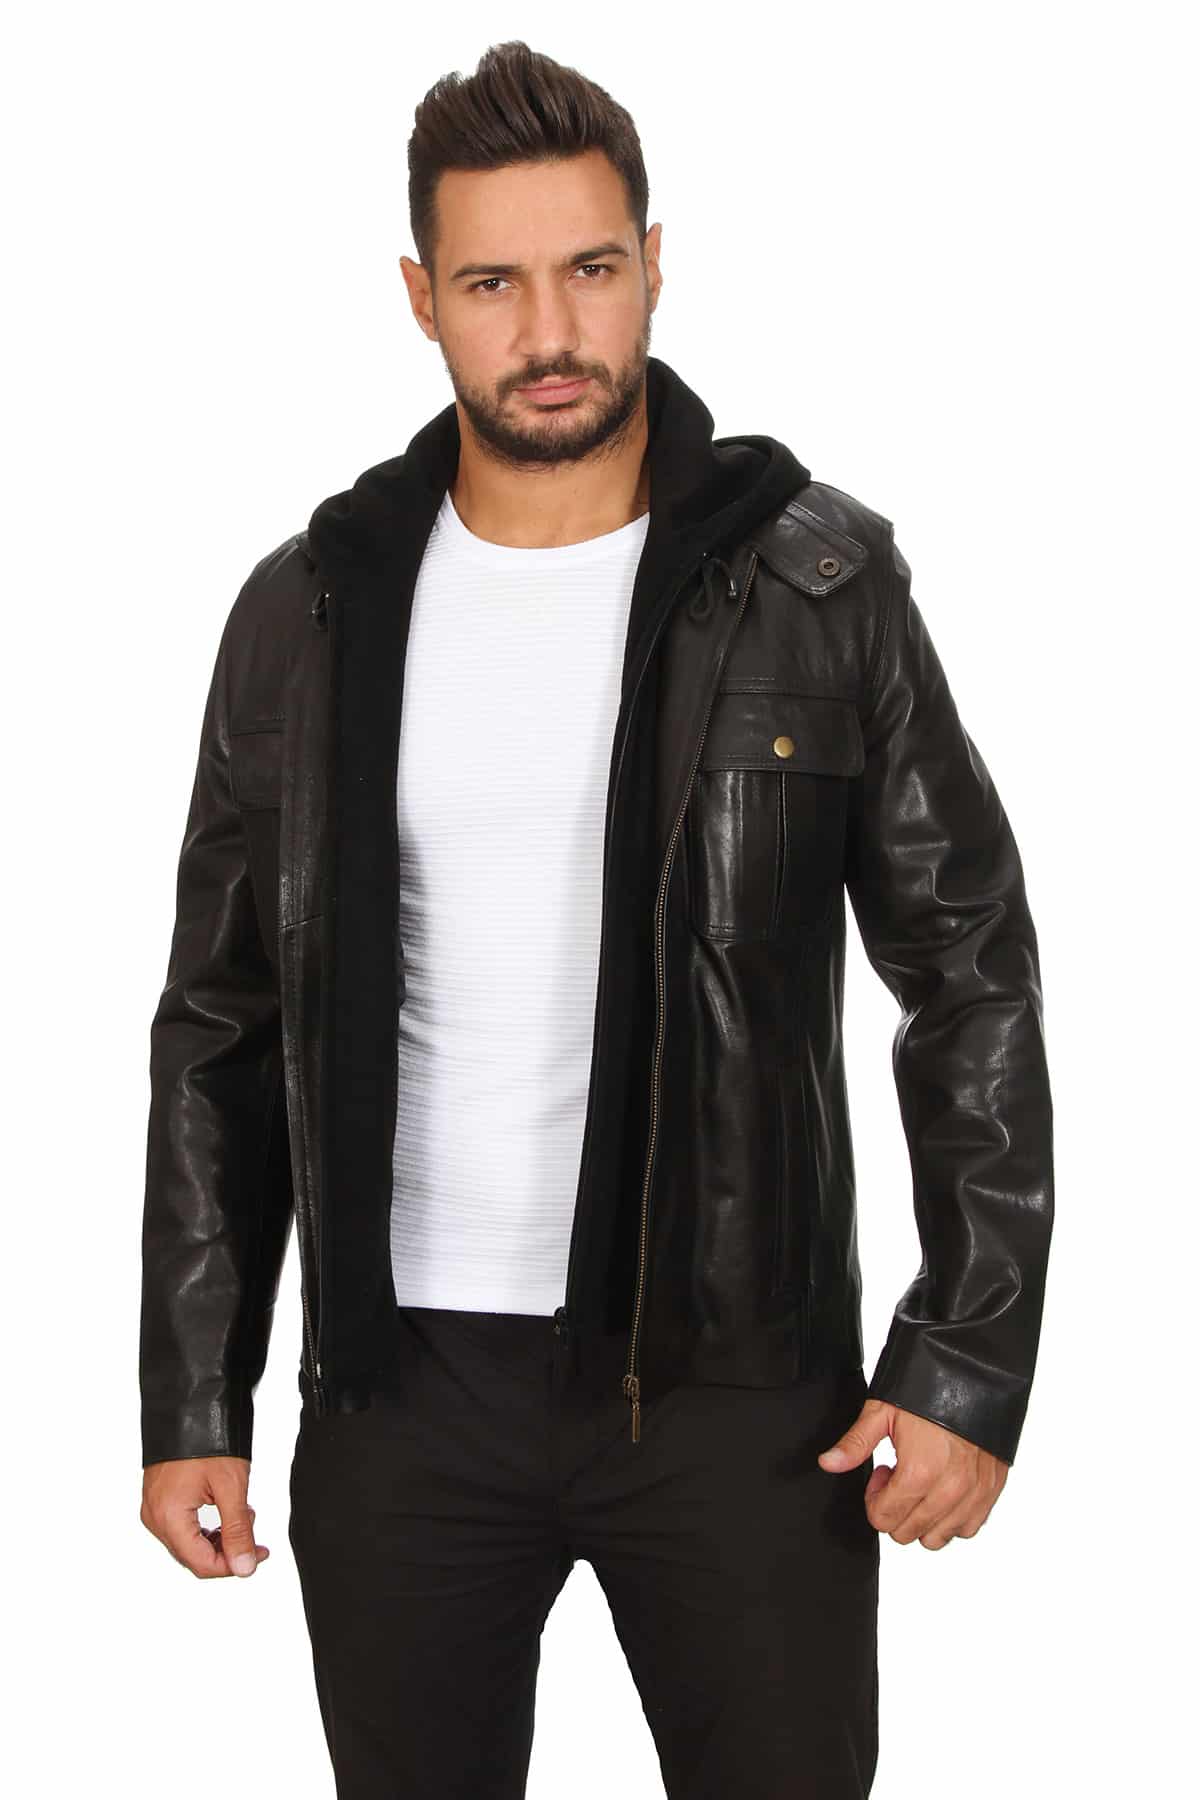 Cheap Leather Jackets Mens